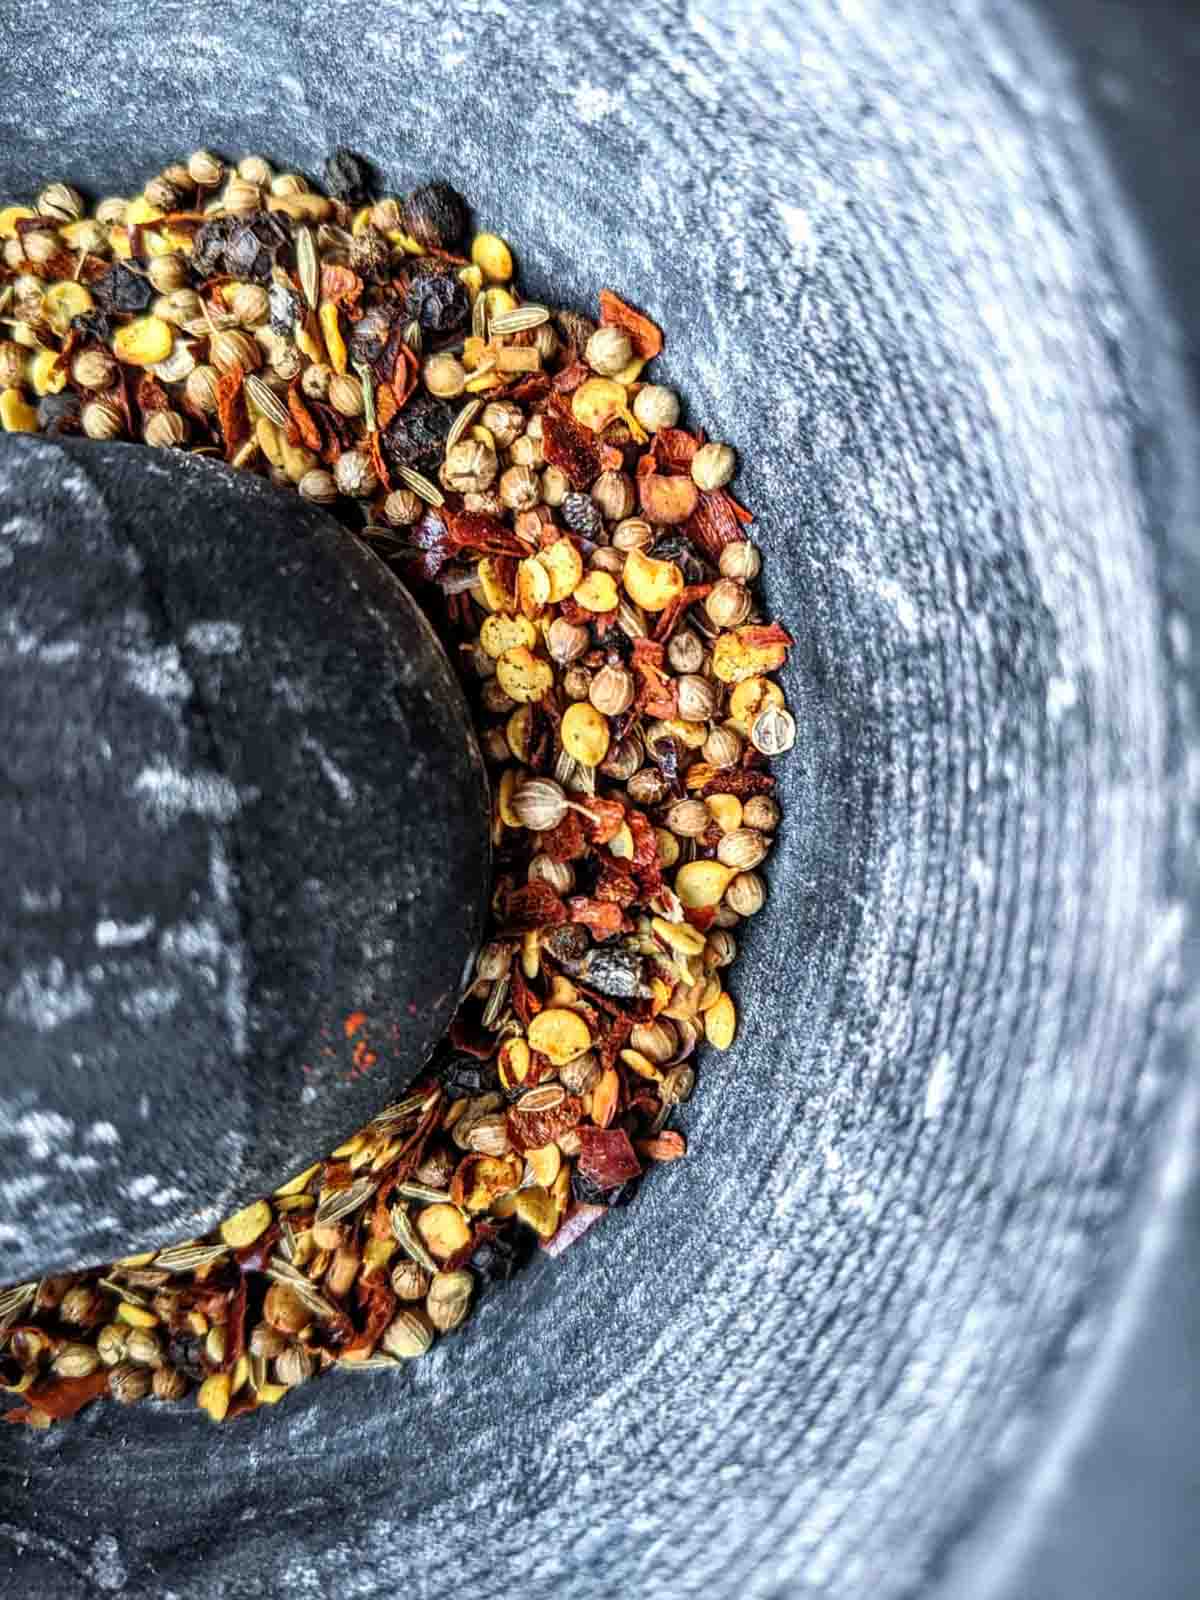 An overhead view of spices being ground in a stone mortar and pestle to make berbere spice.